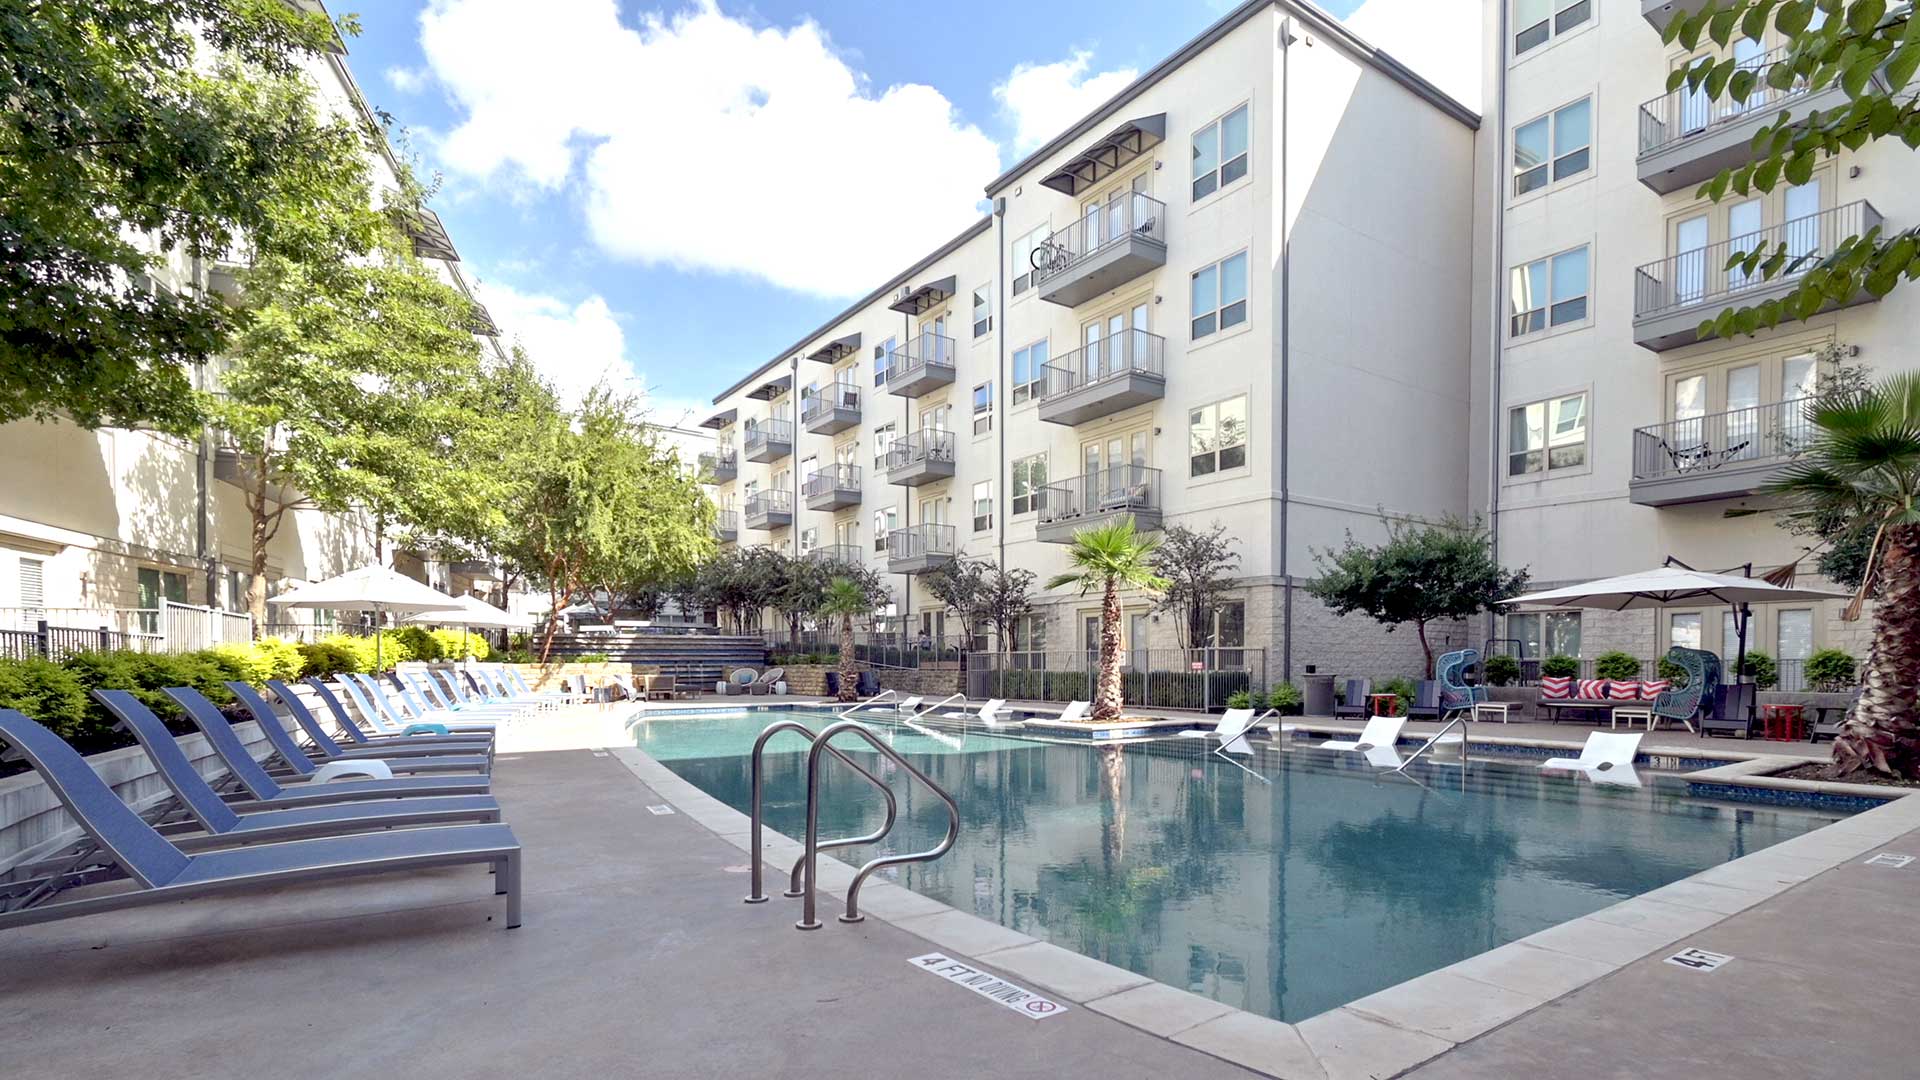 Standing at the corner of the pool with a line of lounge chairs running off down the left and the tanning shelf across the pool. There are trees all over the courtyard and the apartment building surrounds the scene.